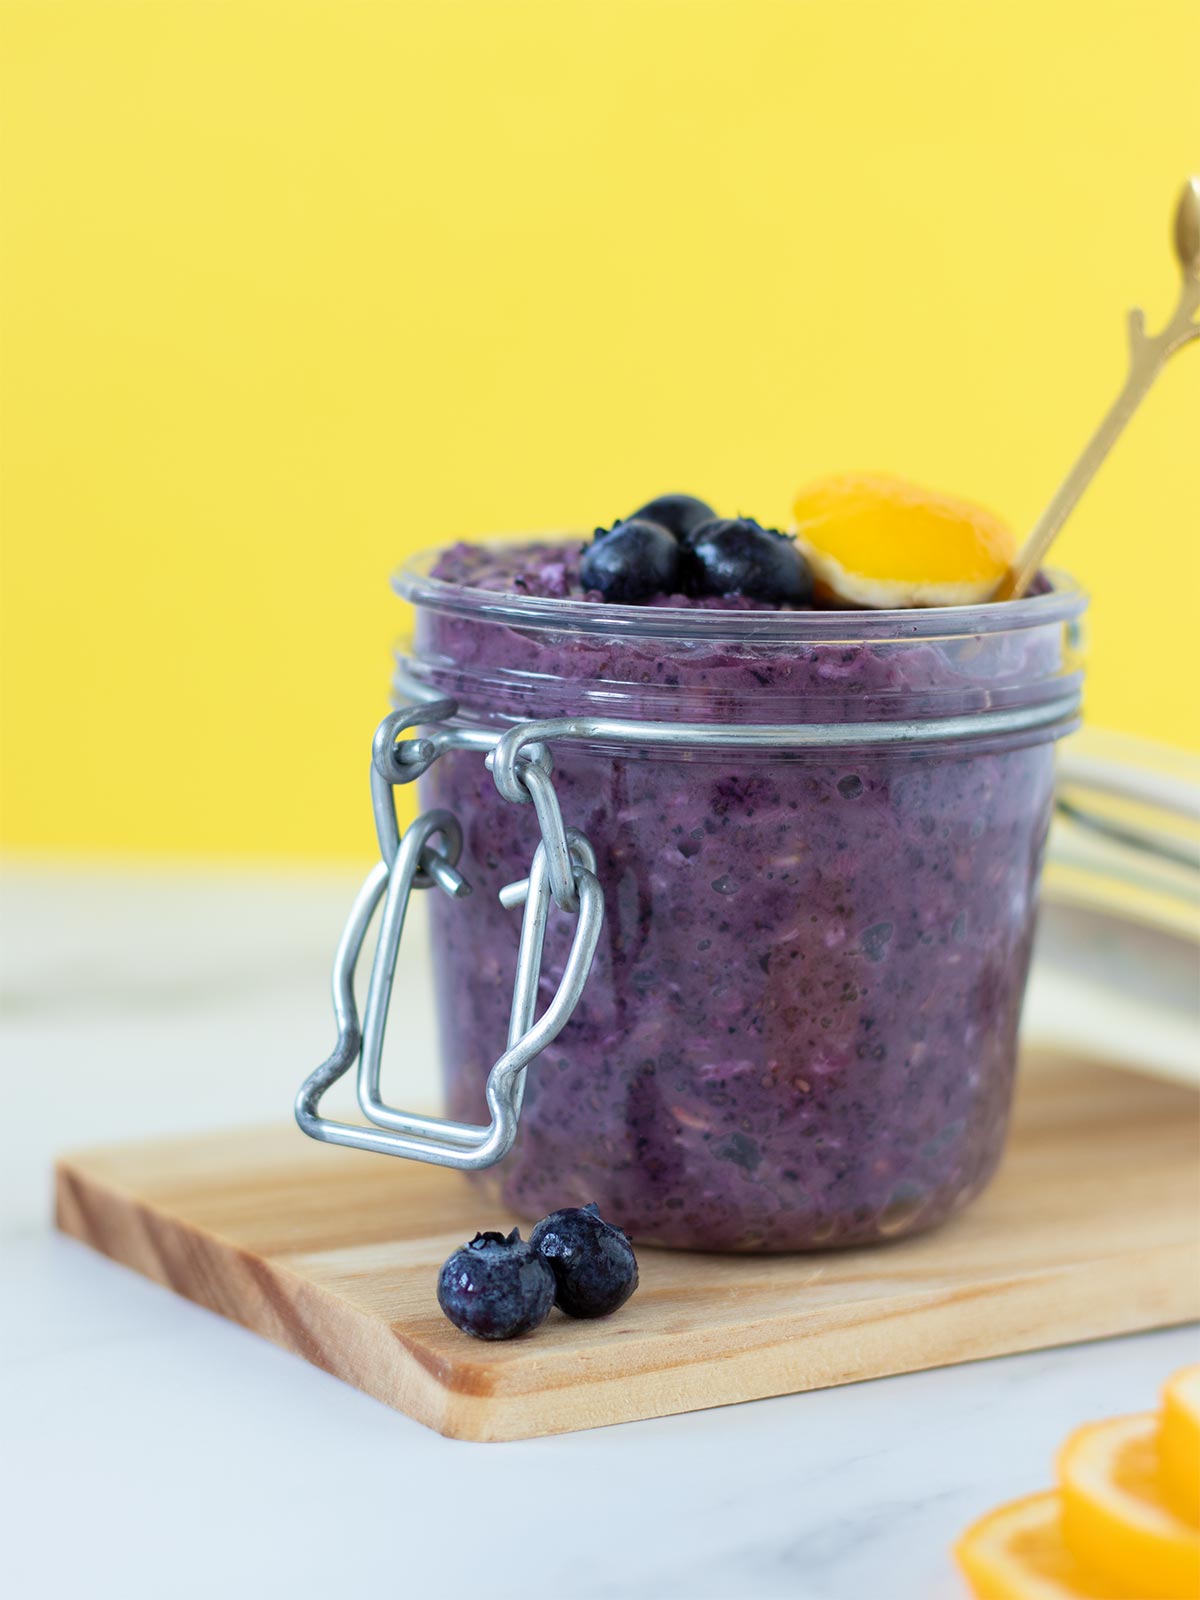 Healthy overnight oats with frozen blueberries, lemon, chia seeds, and peanut butter in a jar with yellow background